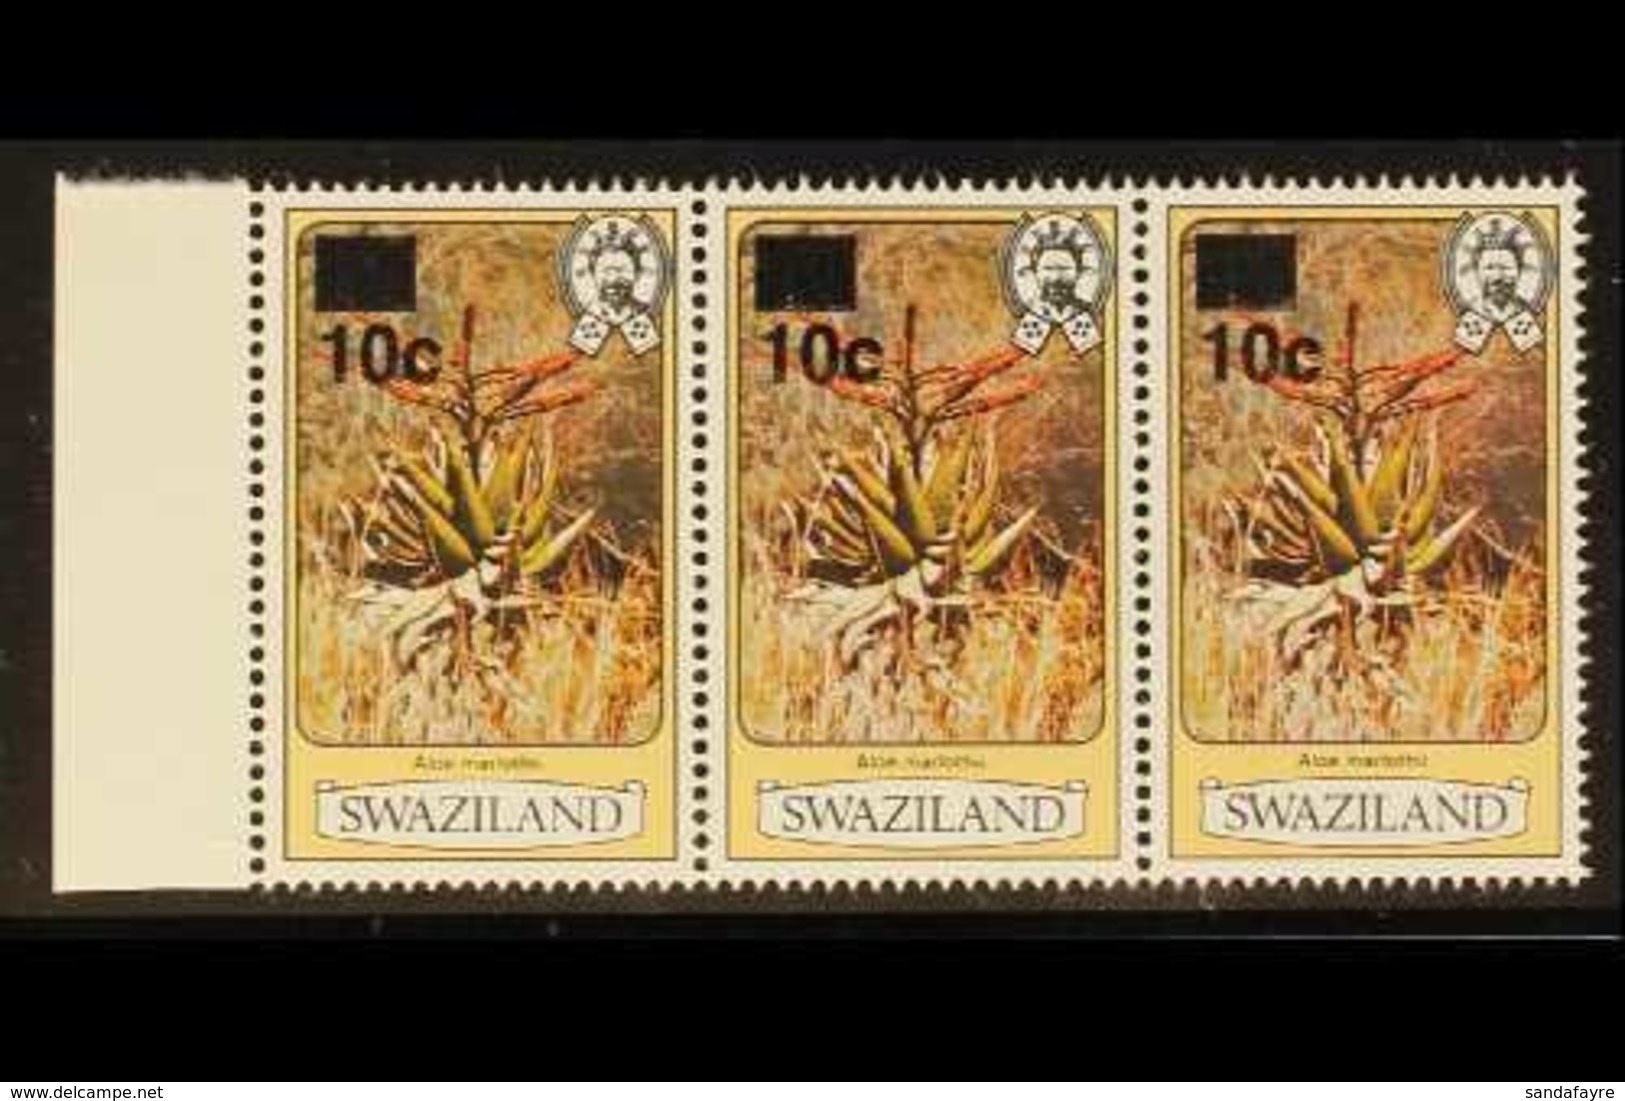 1984 10c On 4c Surcharge Perf 13½ Without Imprint Date, SG 471, Never Hinged Mint Marginal Horizontal STRIP Of 10, Fresh - Swasiland (...-1967)